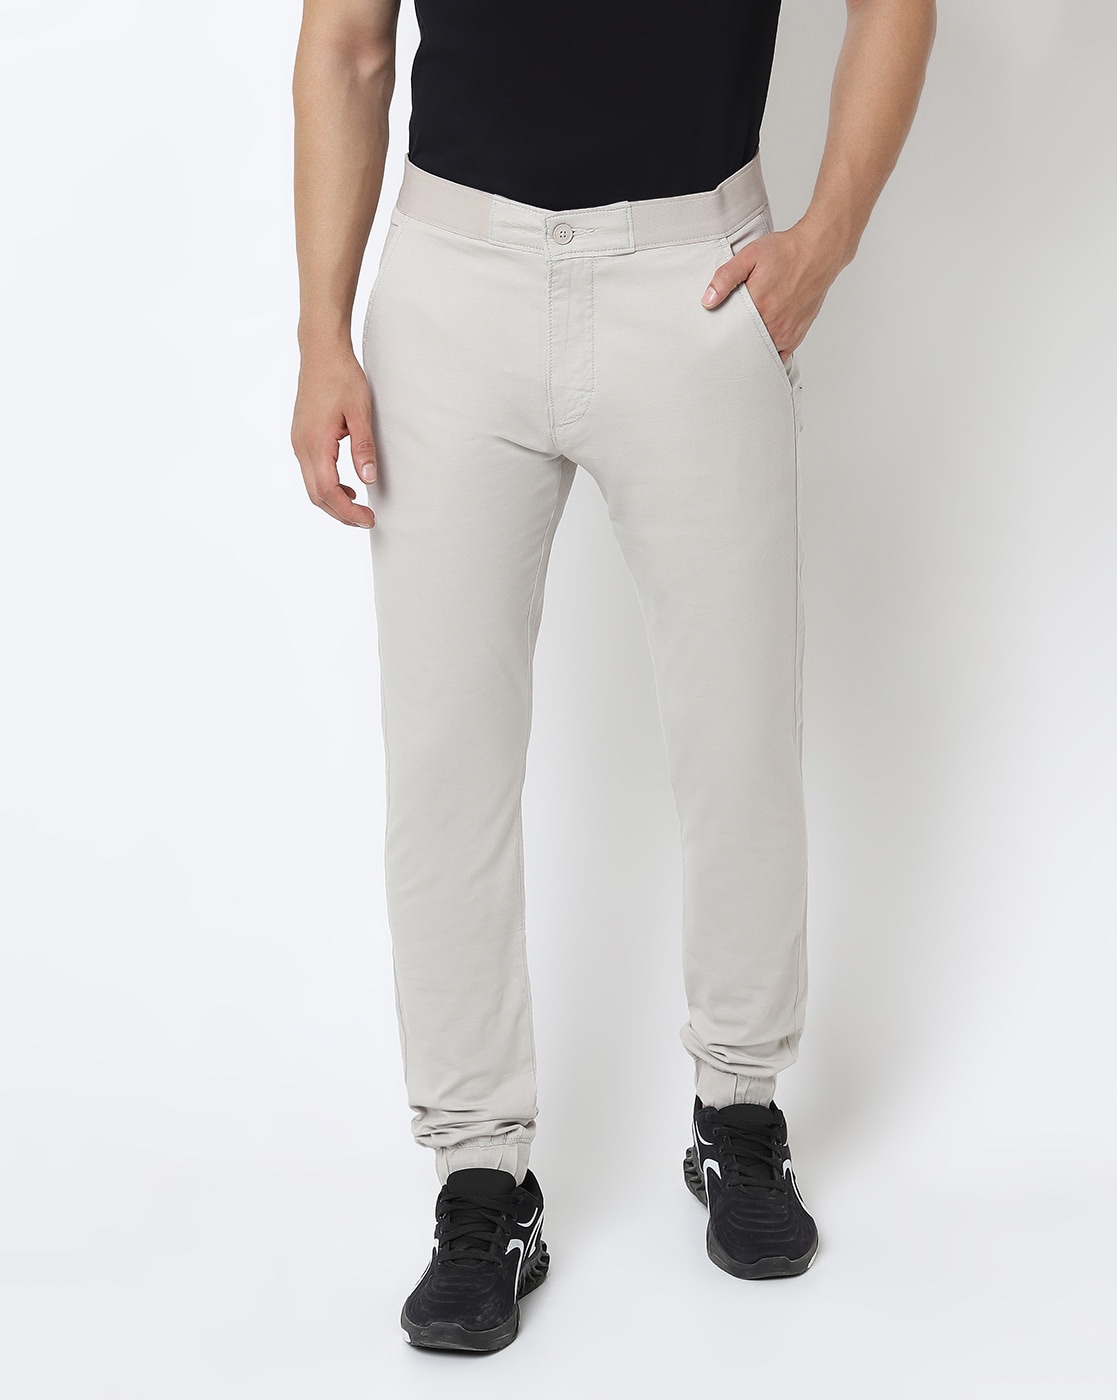 Buy White Trousers & Pants for Men by LEVIS Online 